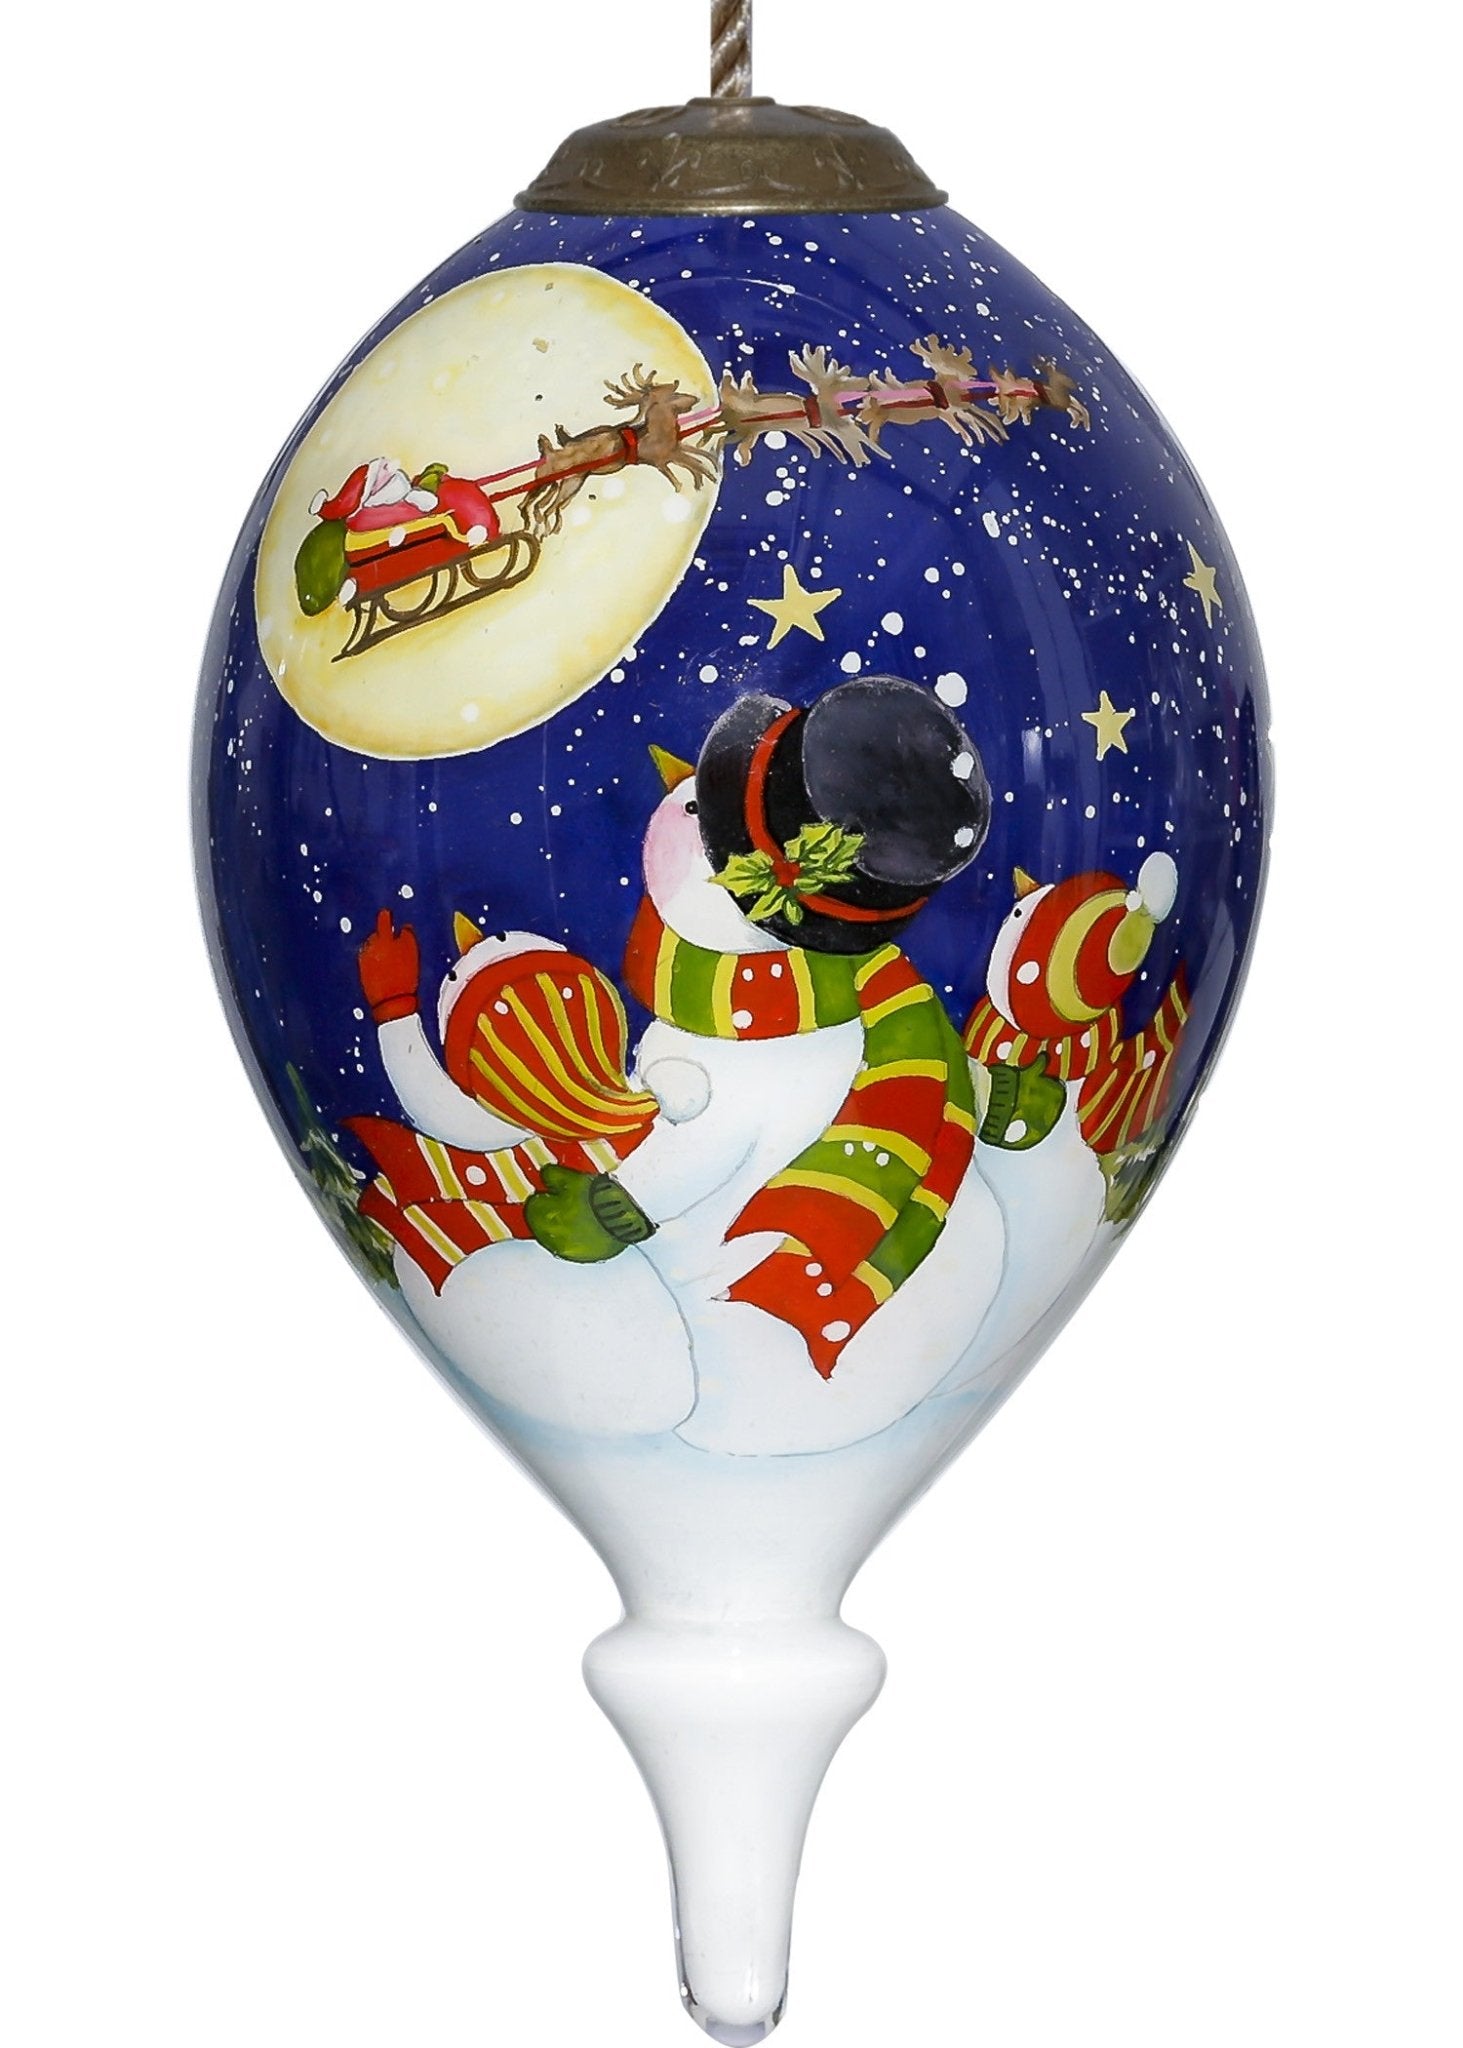 Snowmen-Family-Watching-Santa-on-a-Sleigh-Hand-Painted-Mouth-Blown-Glass-Ornament-Christmas-Ornaments